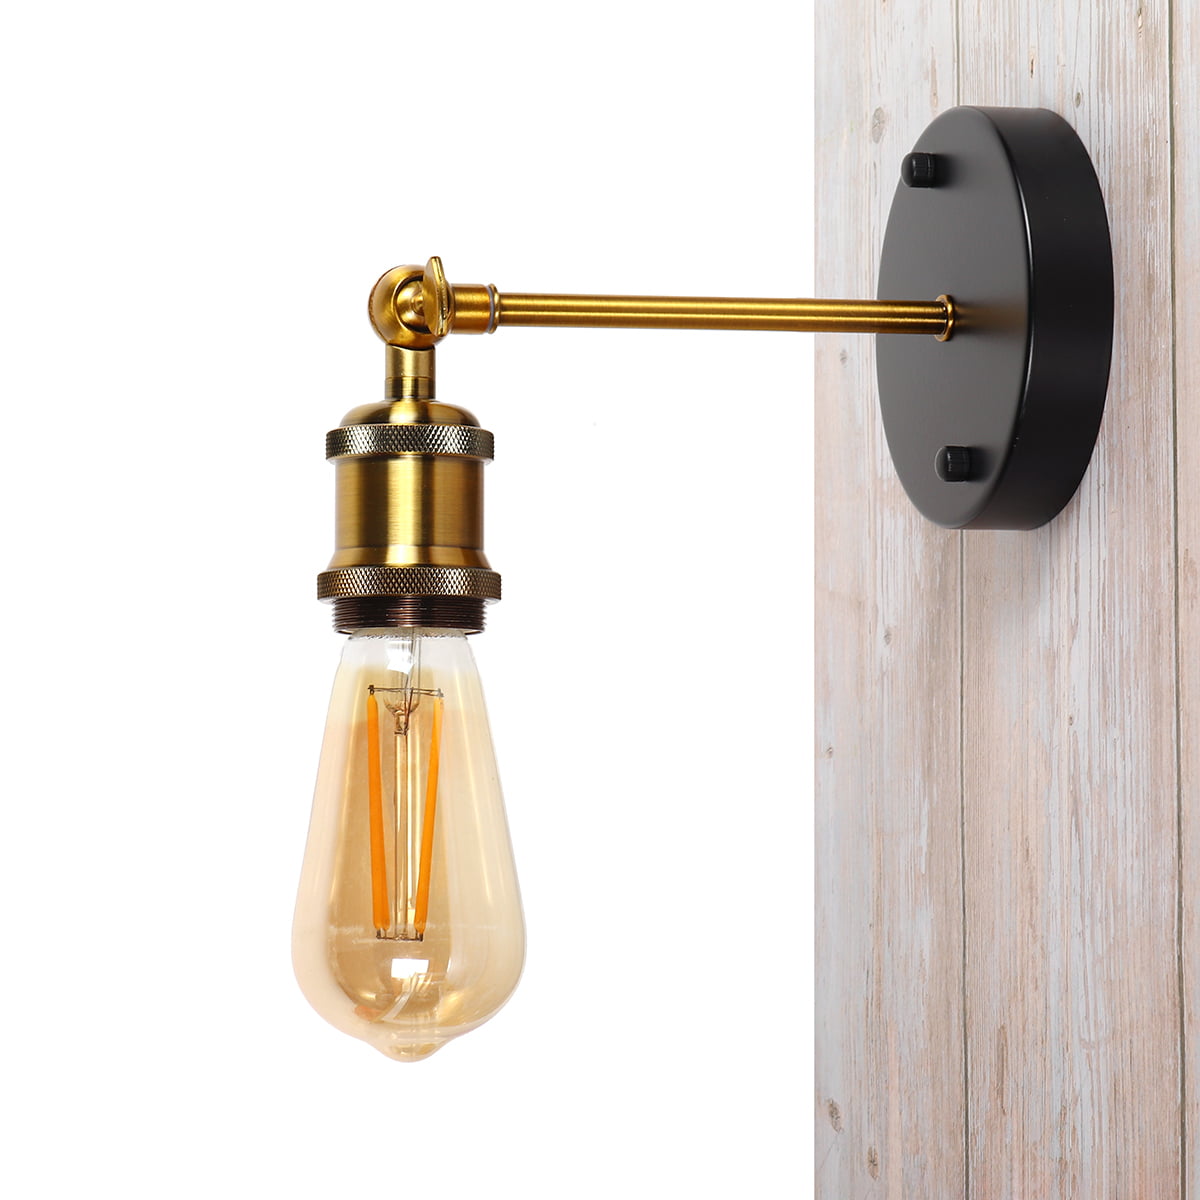 Metal Wall Sconce Bar Corridor Lamp Holder with E27 Light Socket Home Decoration 